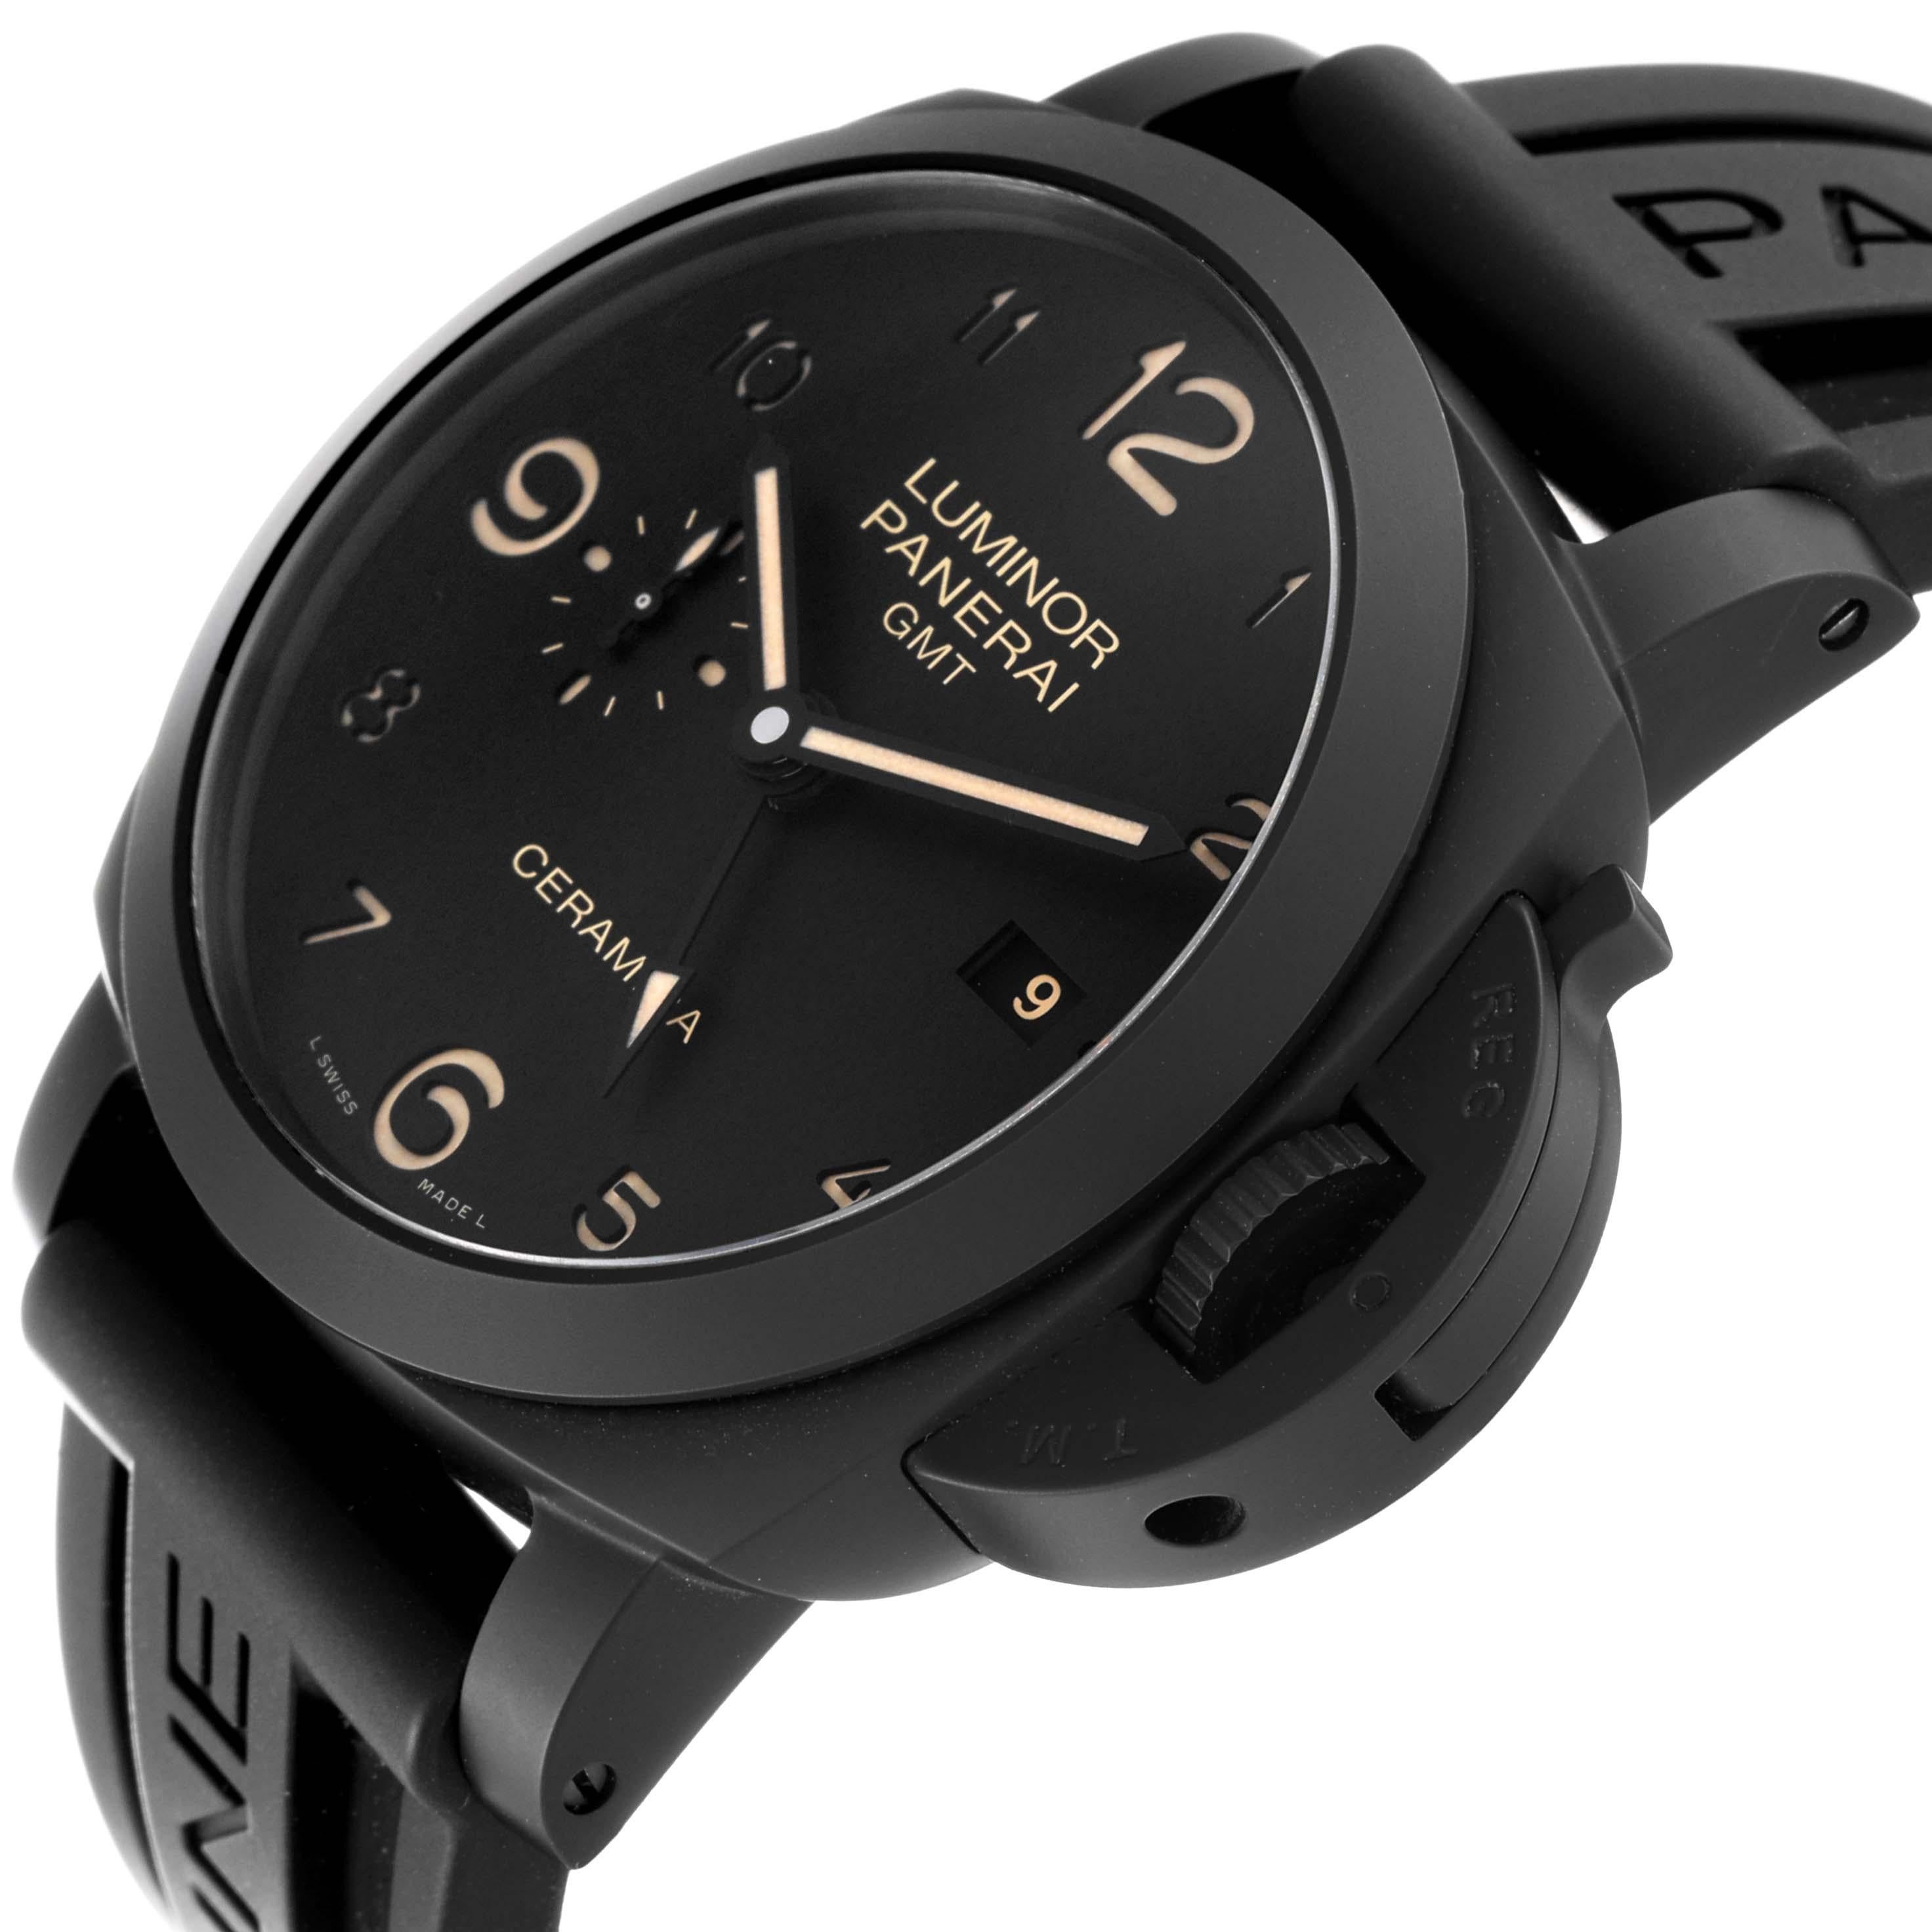 Men's Panerai Luminor 1950 3 Days GMT Ceramic Limited Edition Mens Watch PAM00441 For Sale